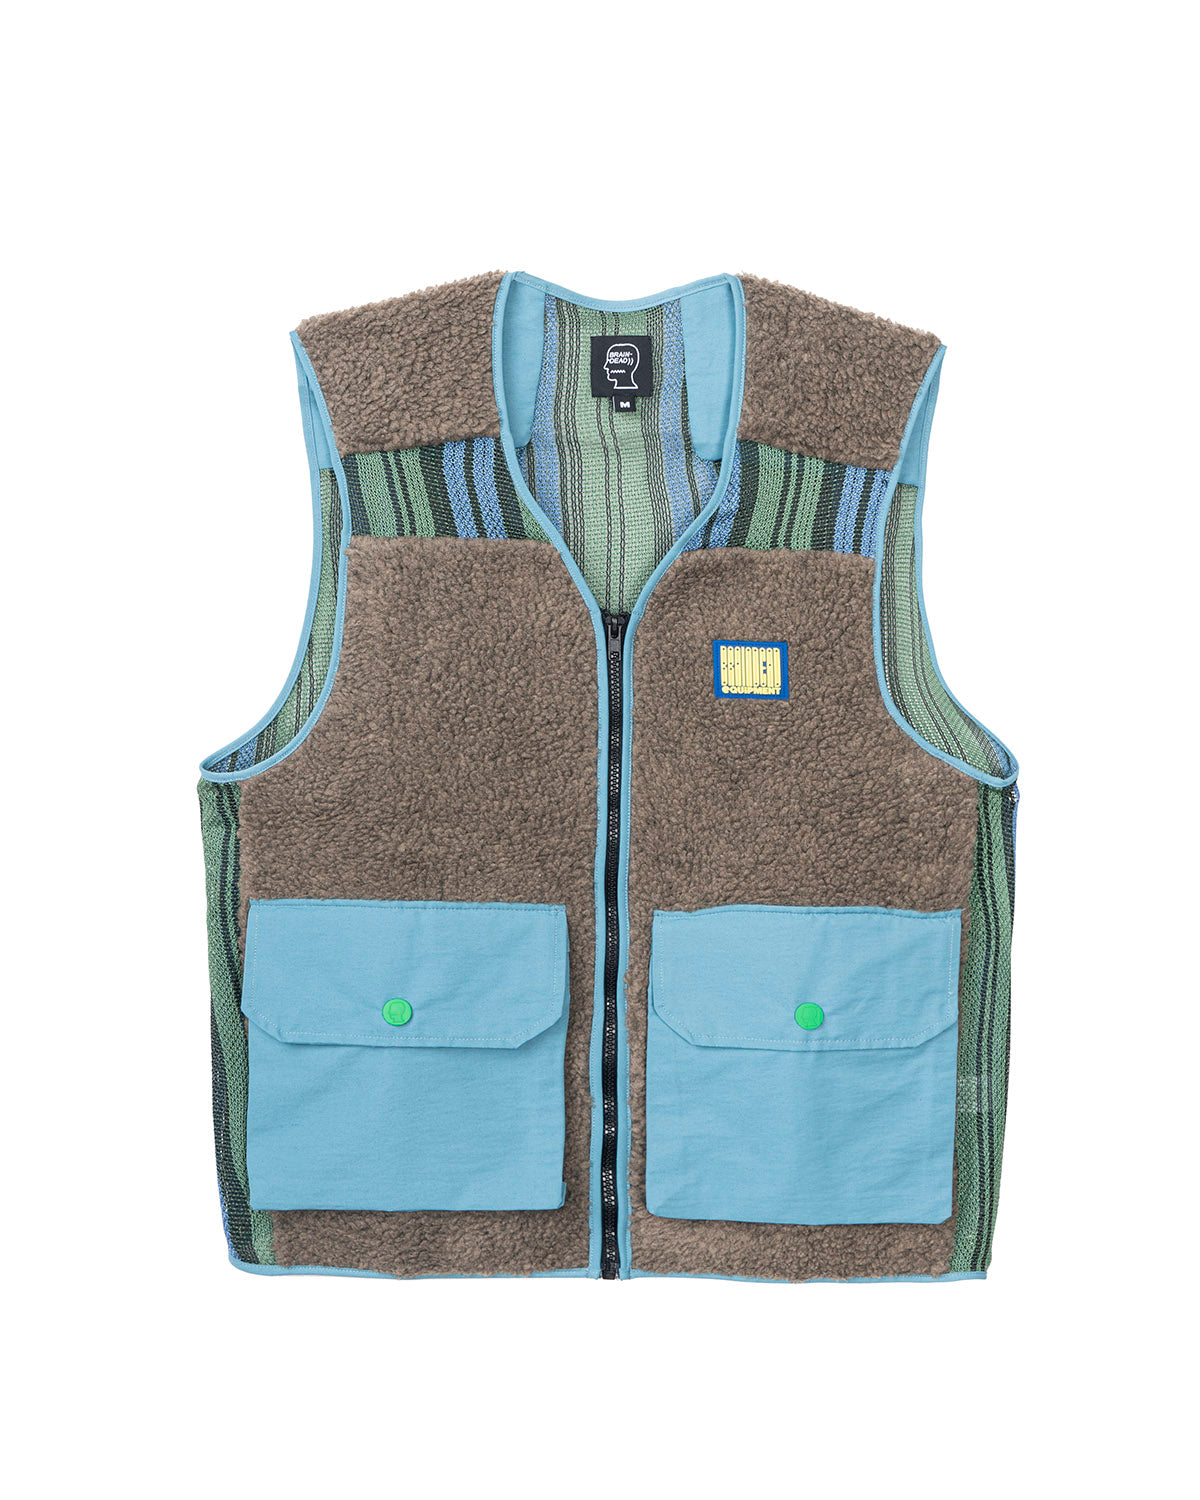 Sherpa Tactical Vest - Brown/Skyblue 1